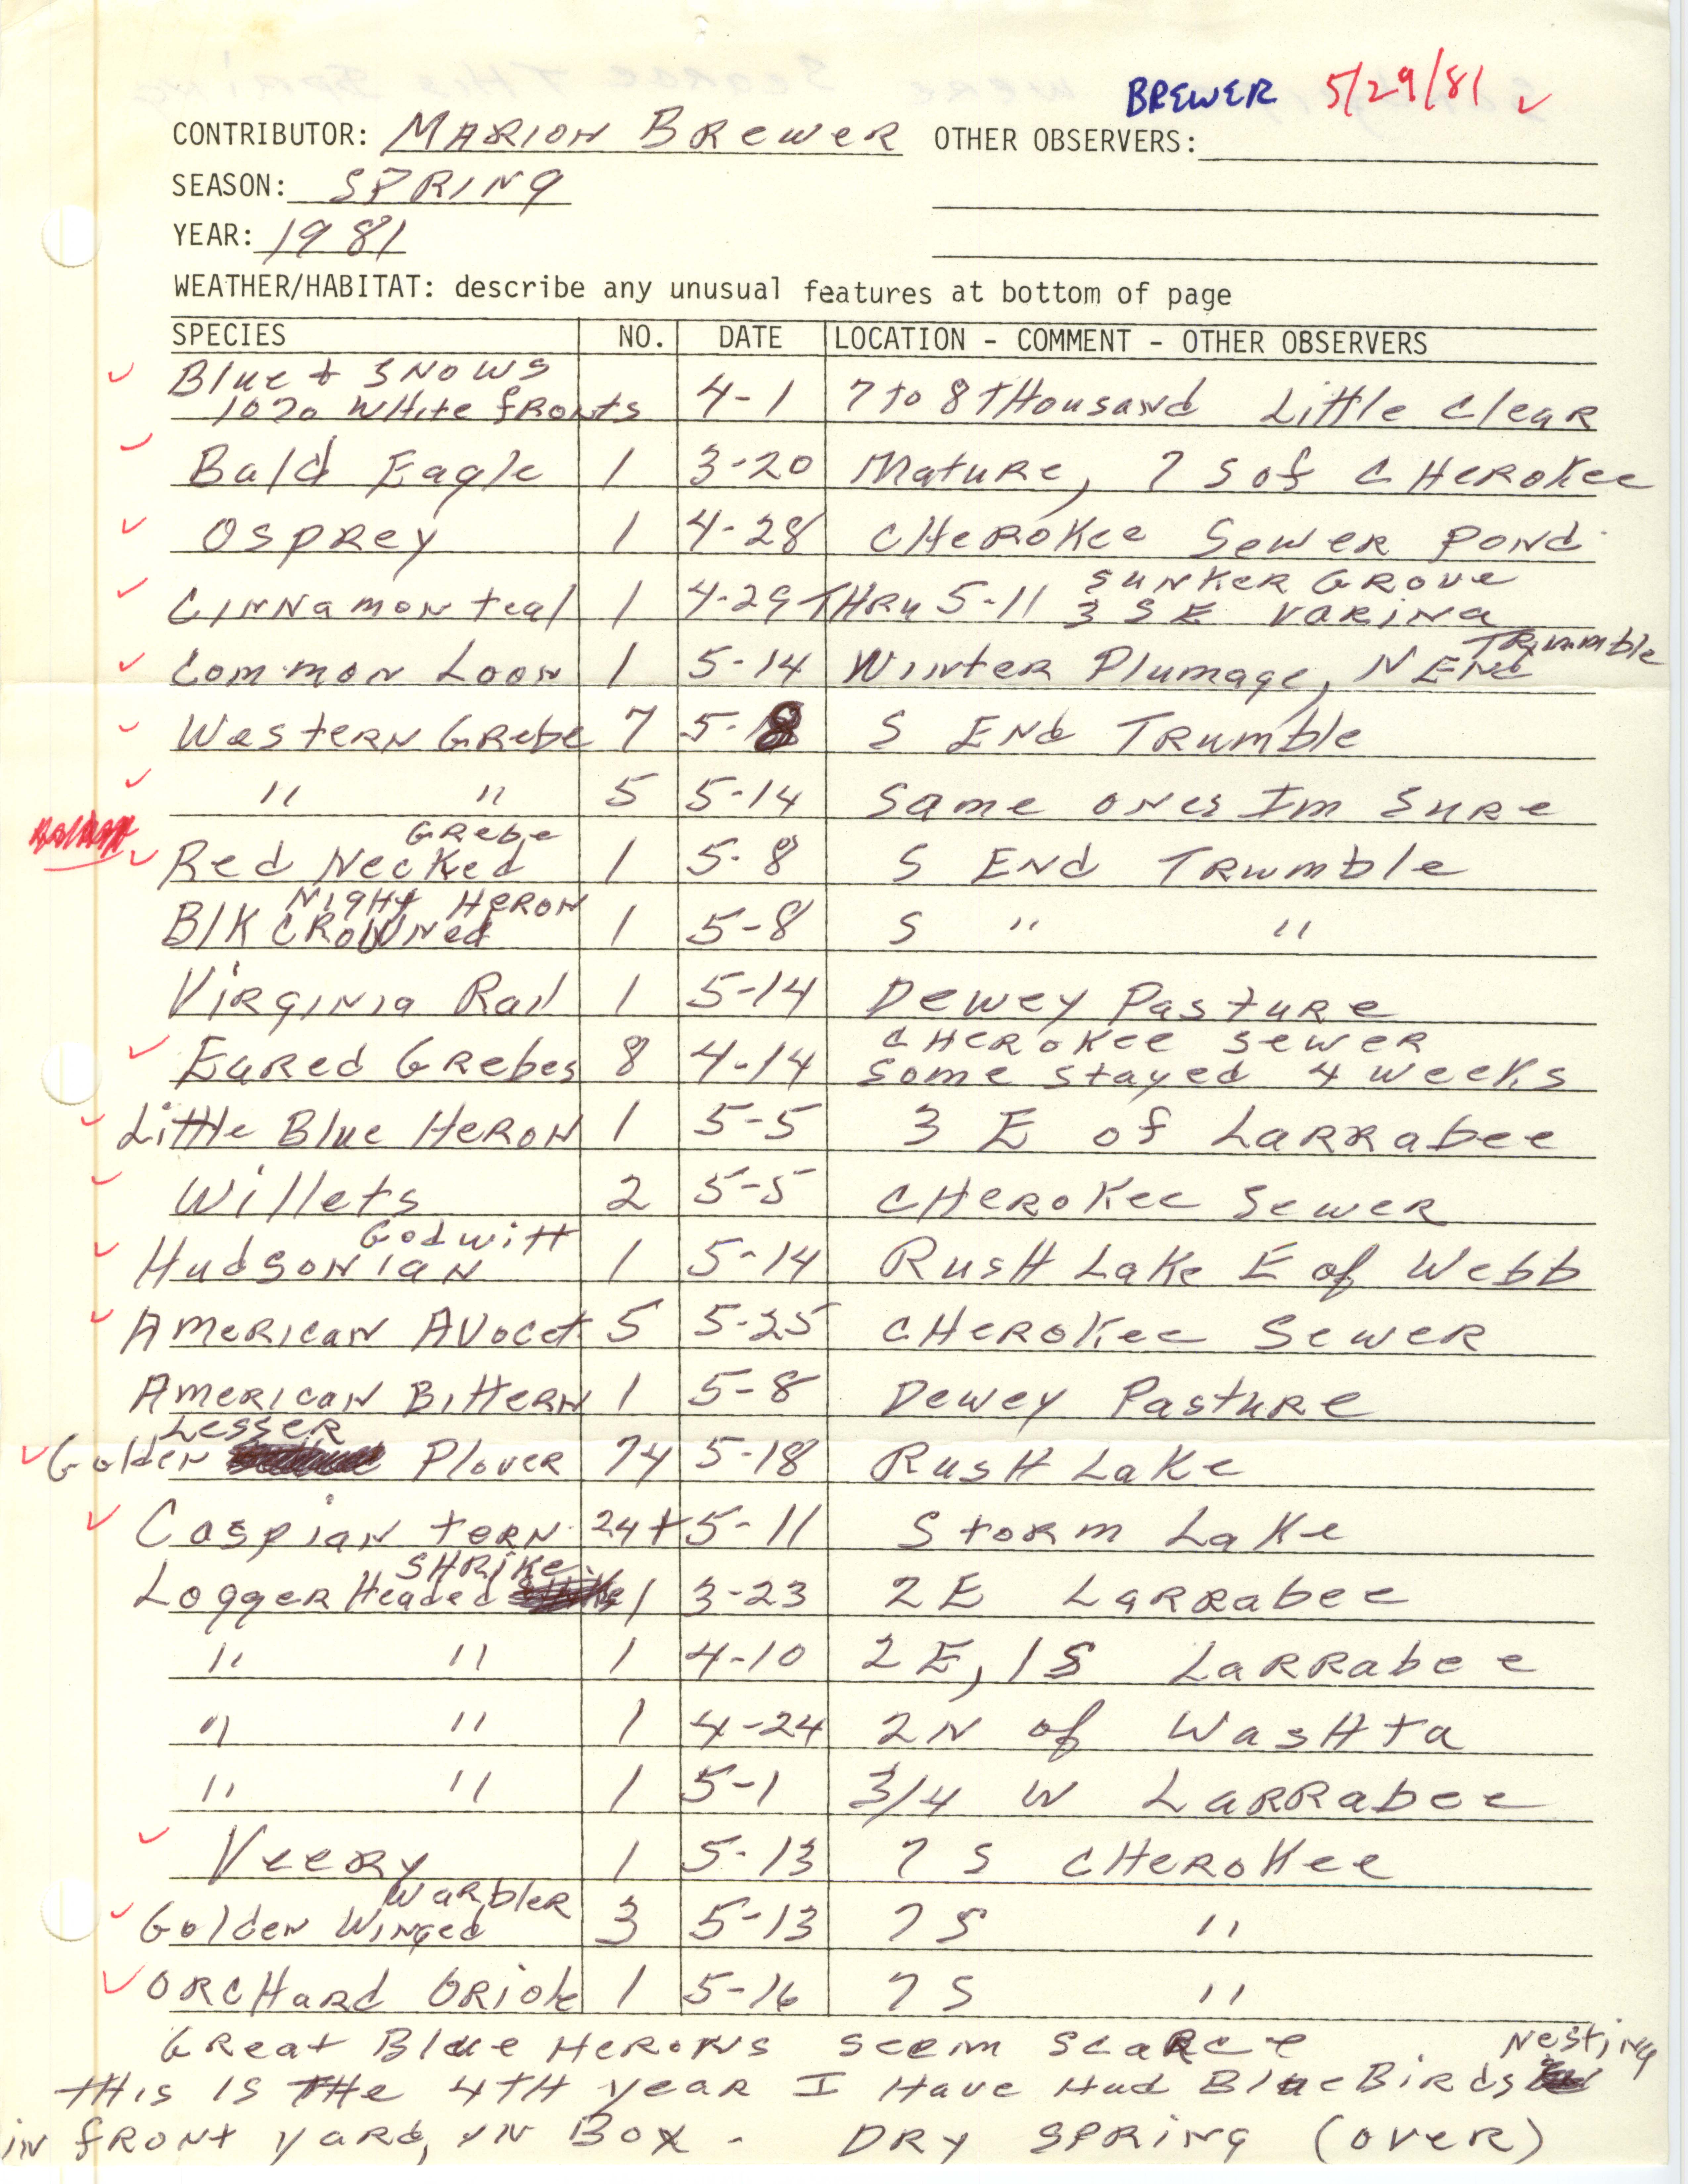 Annotated bird sighting list for spring 1981 compiled by Marion Brewer